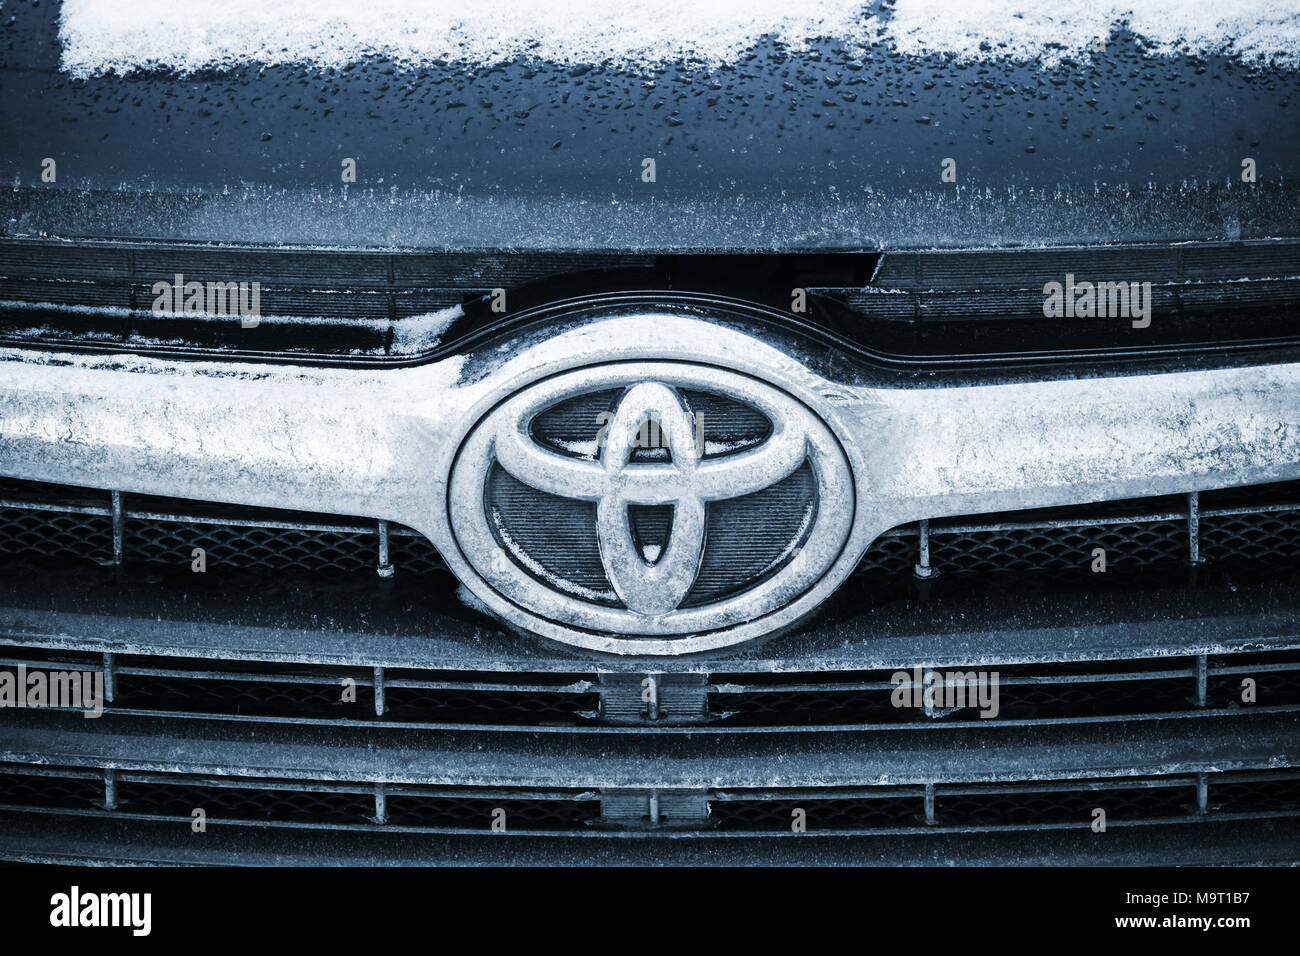 Saint-Petersburg, Russia - February 27, 2018: Toyota Motor Corporation company logo on front grille of black Highlander car, close-up photo Stock Photo